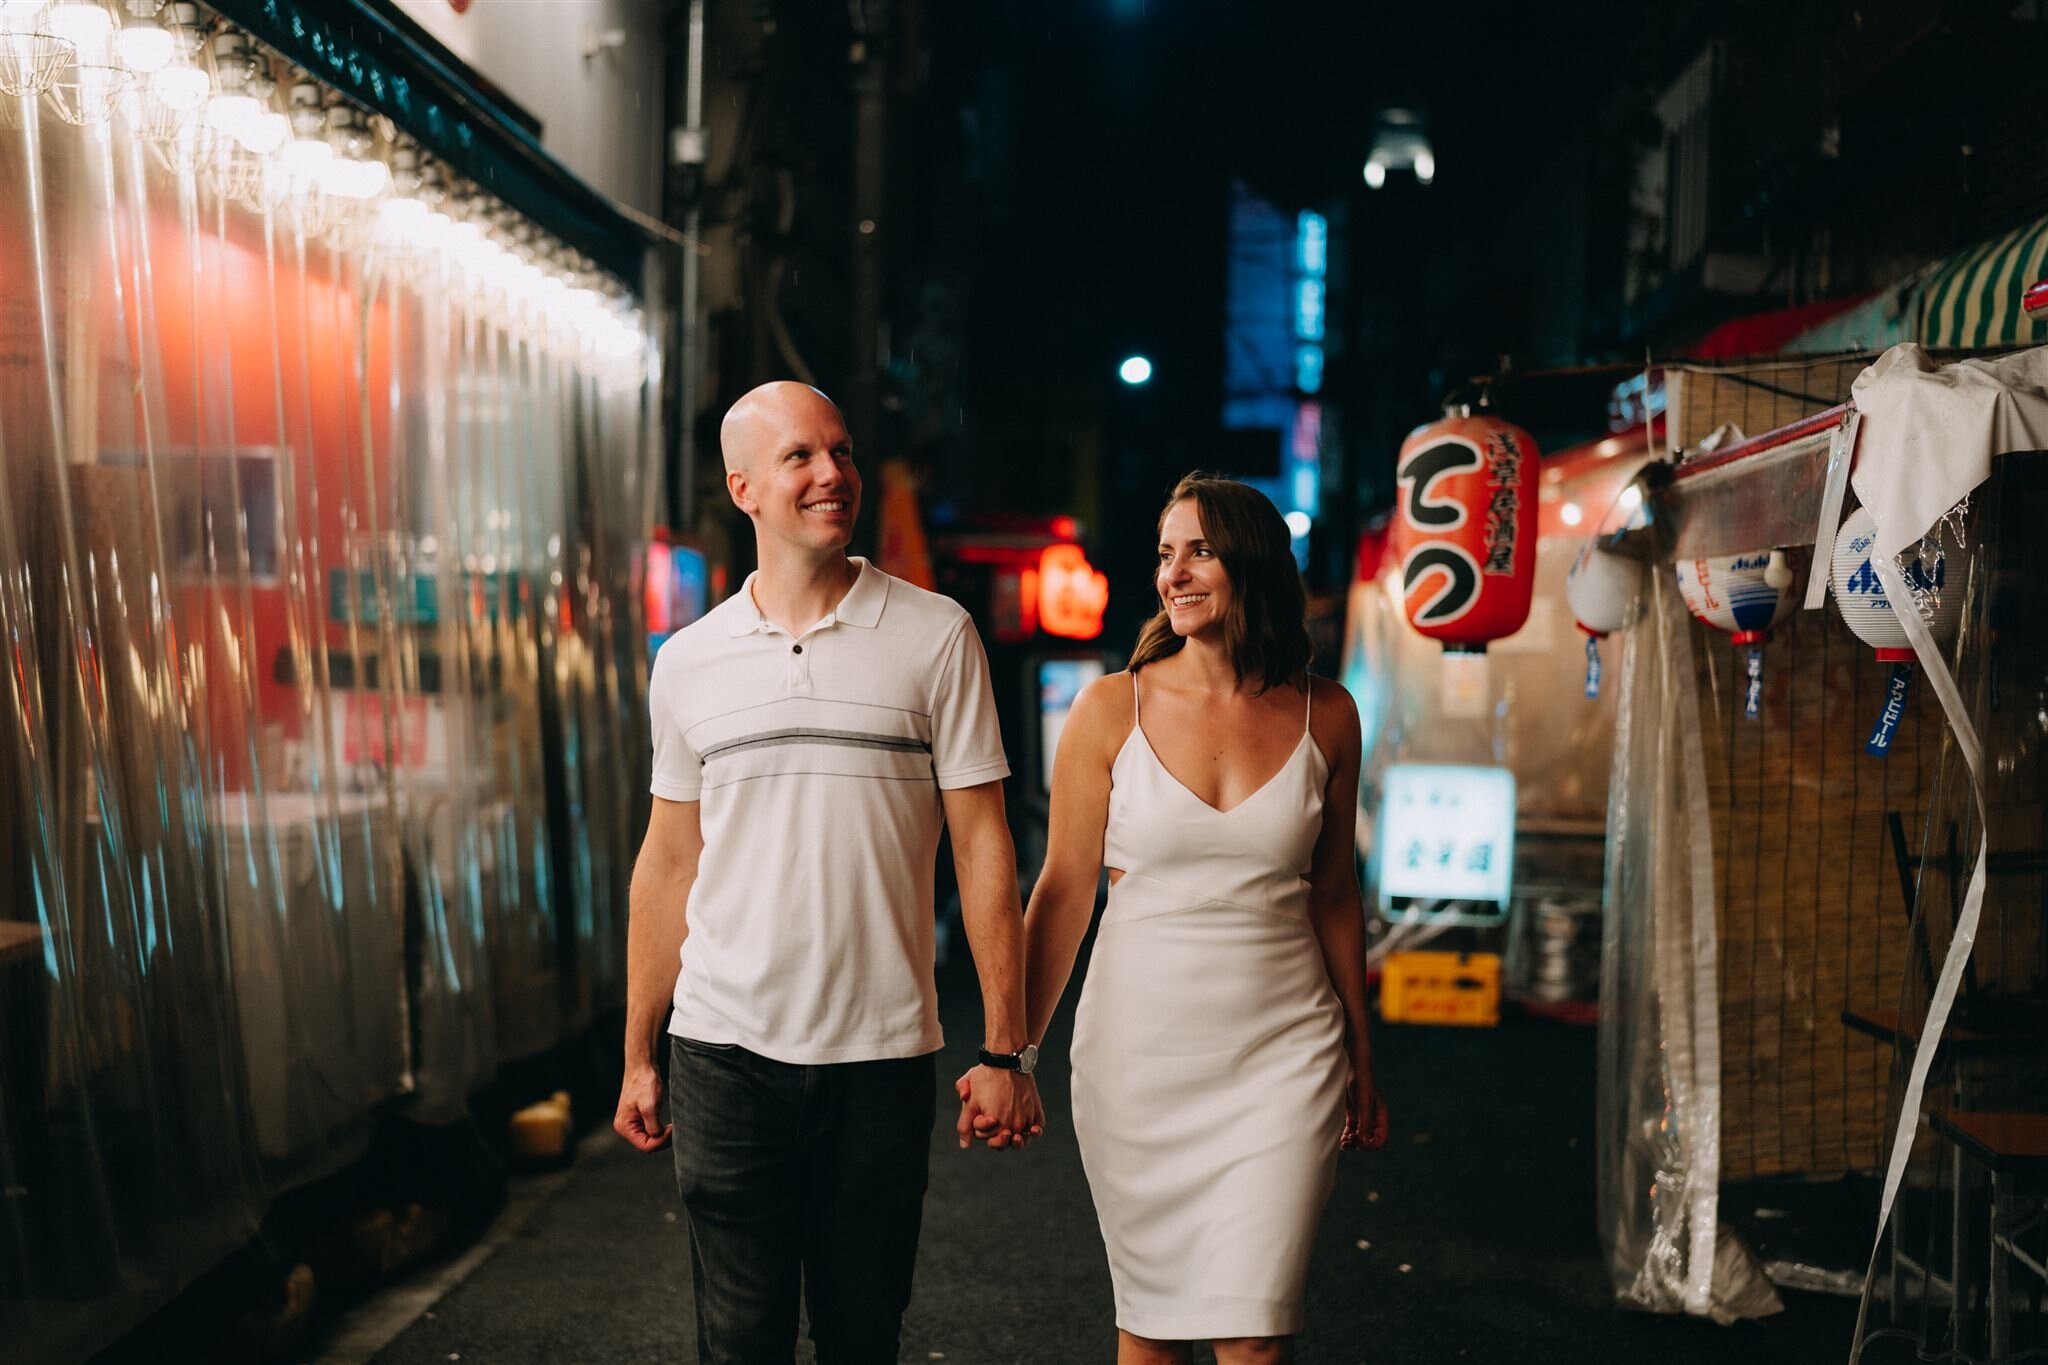 City lights Engagement photoshoot in Tokyo, Japan